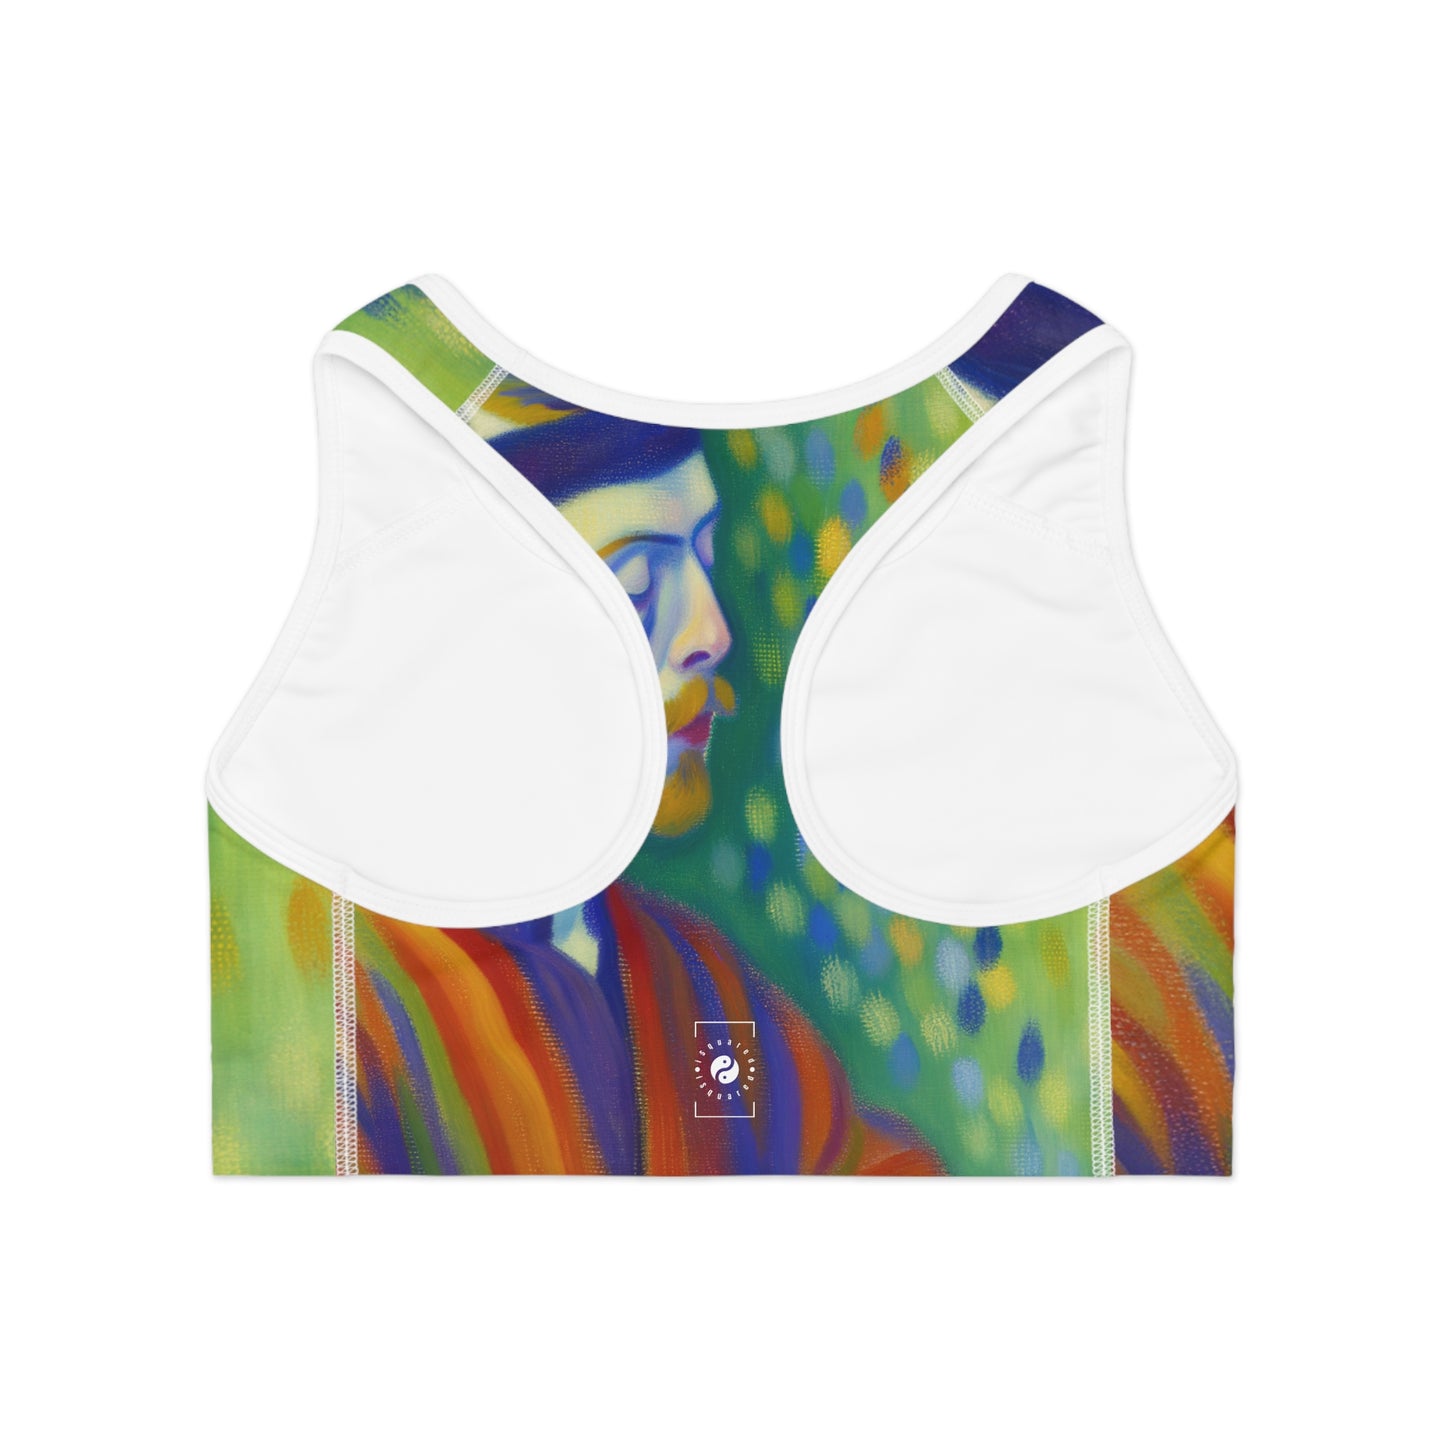 "Serene Resilience: A Frida's Solitude in hues" - High Performance Sports Bra